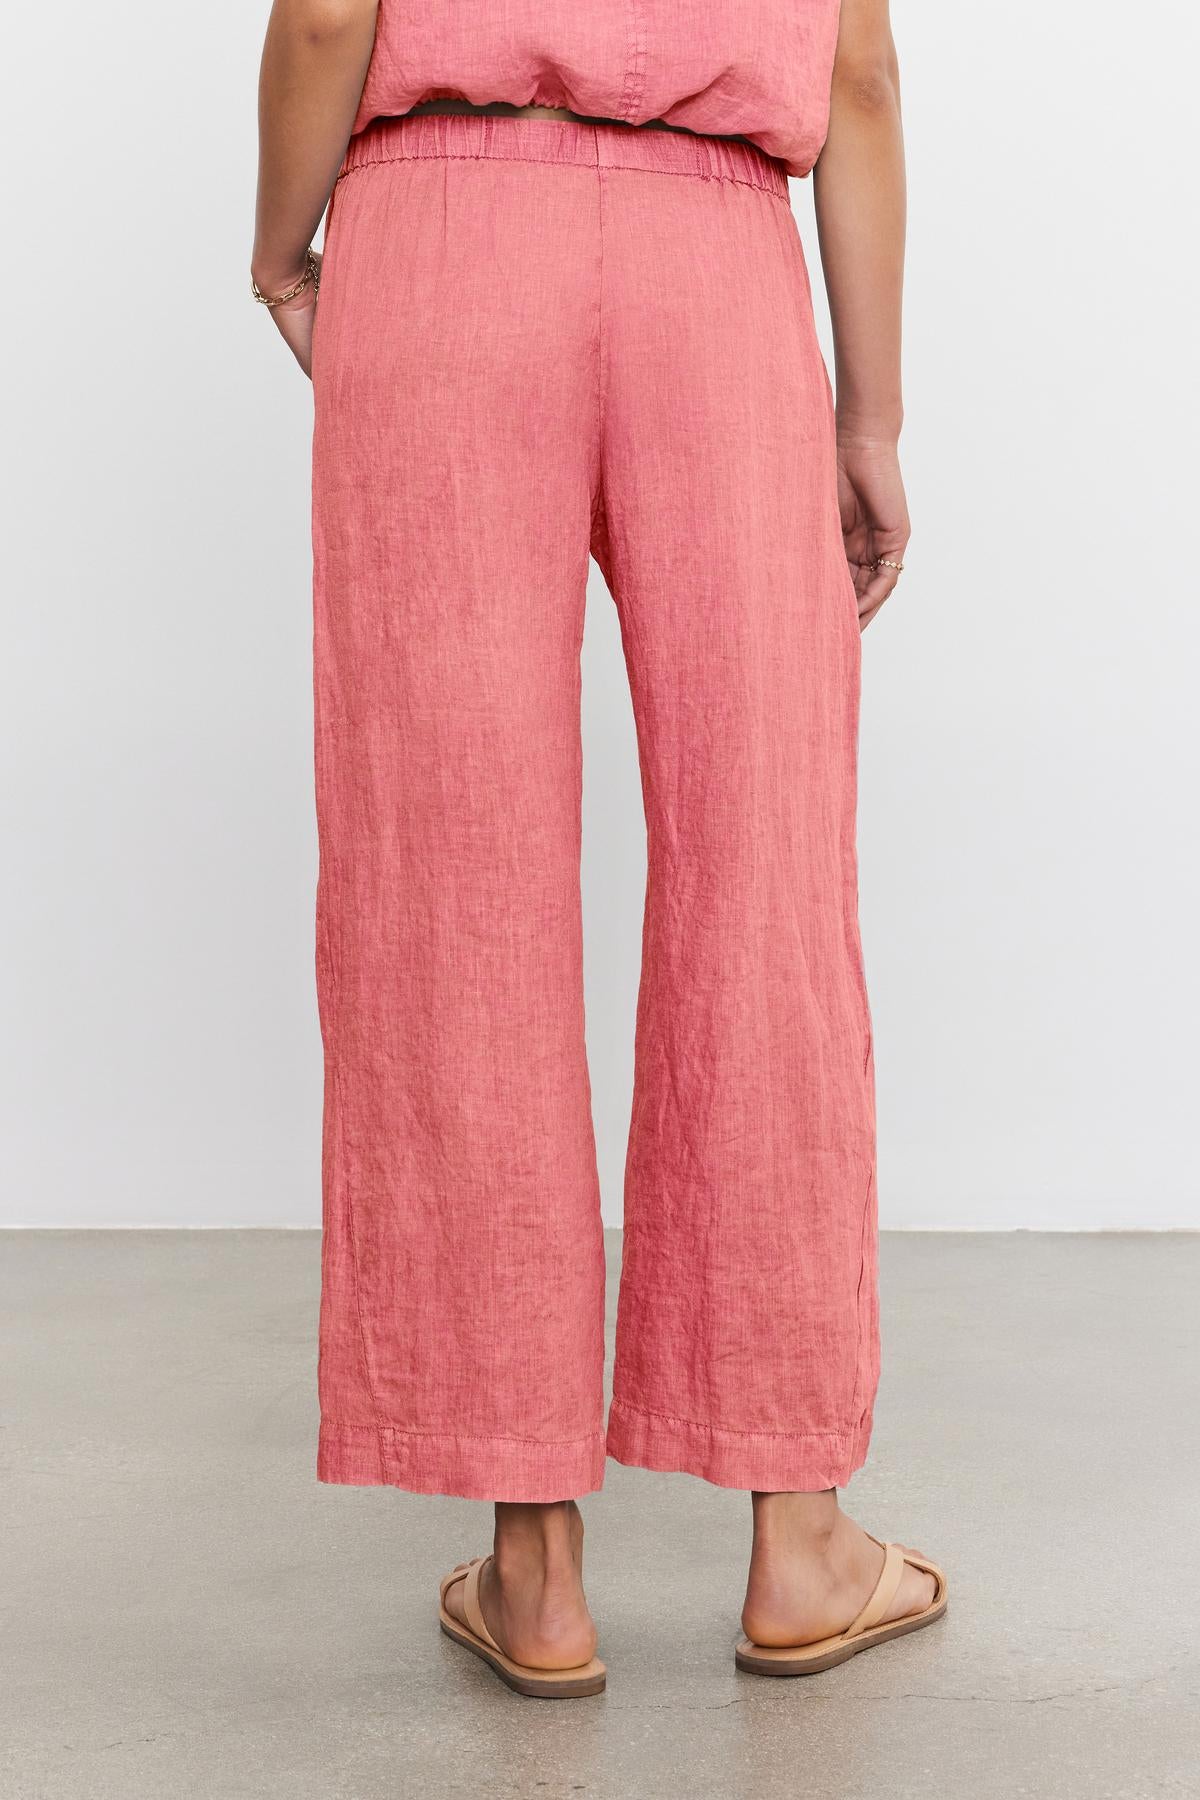 A person is standing against a plain white background wearing pink LOLA LINEN PANT by Velvet by Graham & Spencer and tan sandals, with their back facing the camera.-36943740666049